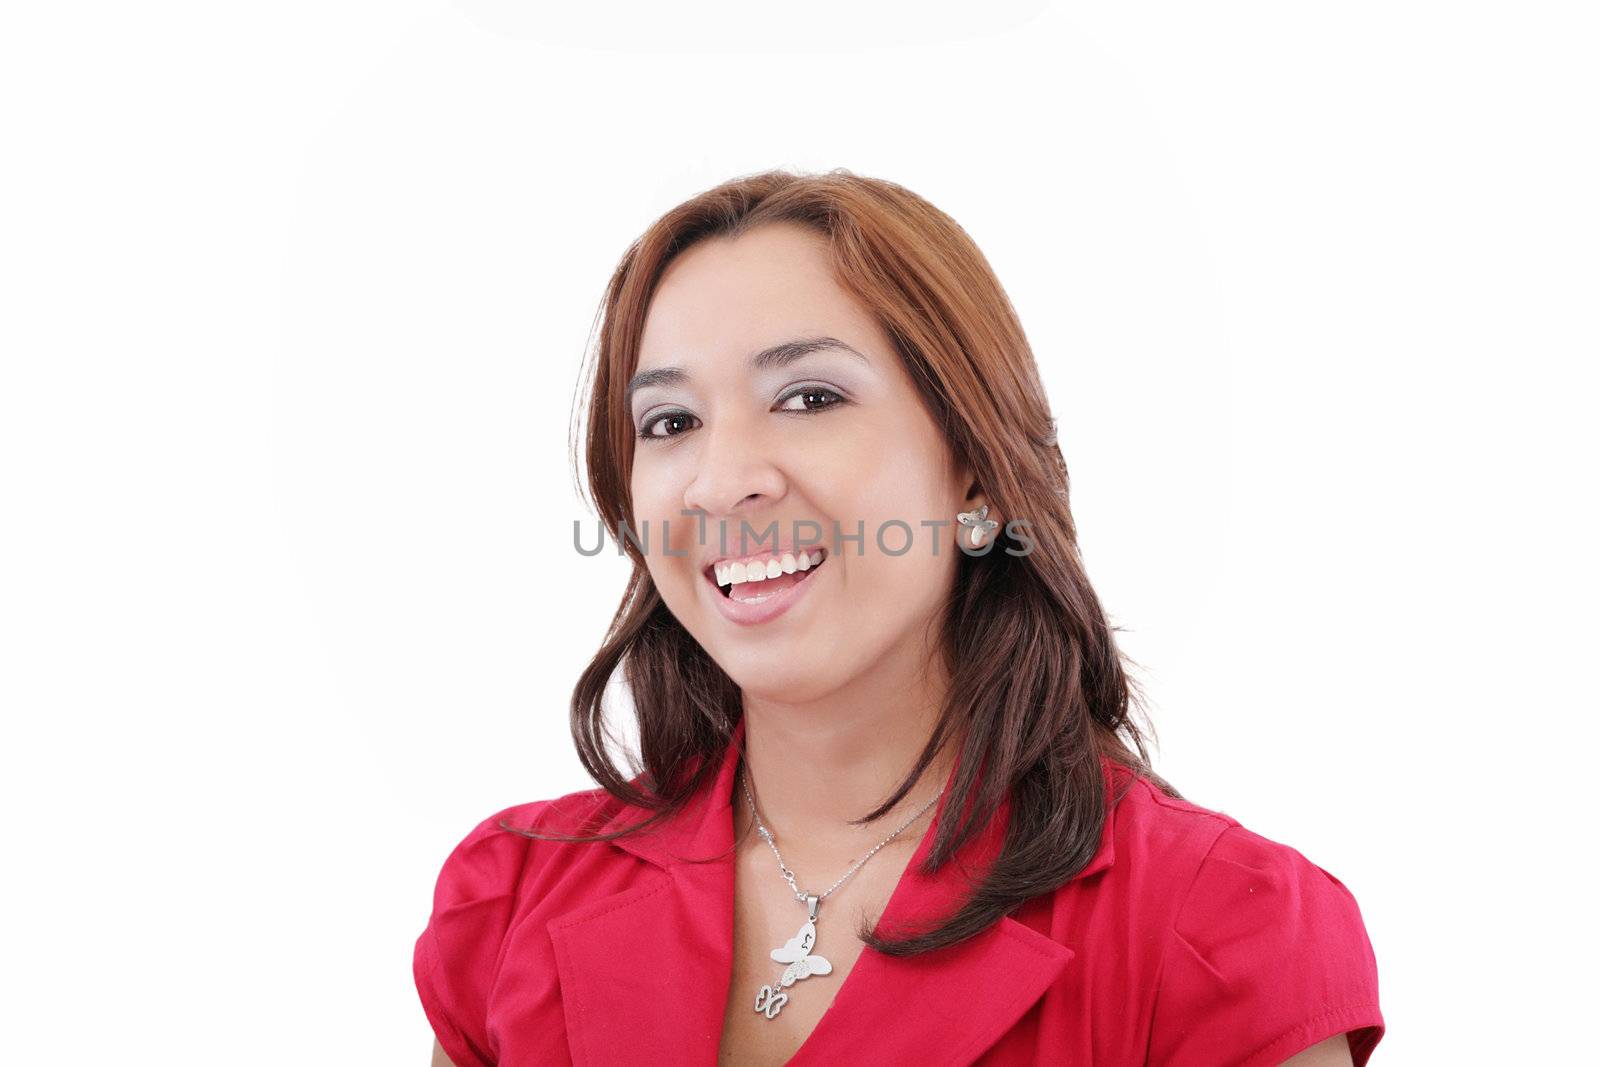 Portrait of beautiful young woman laughing